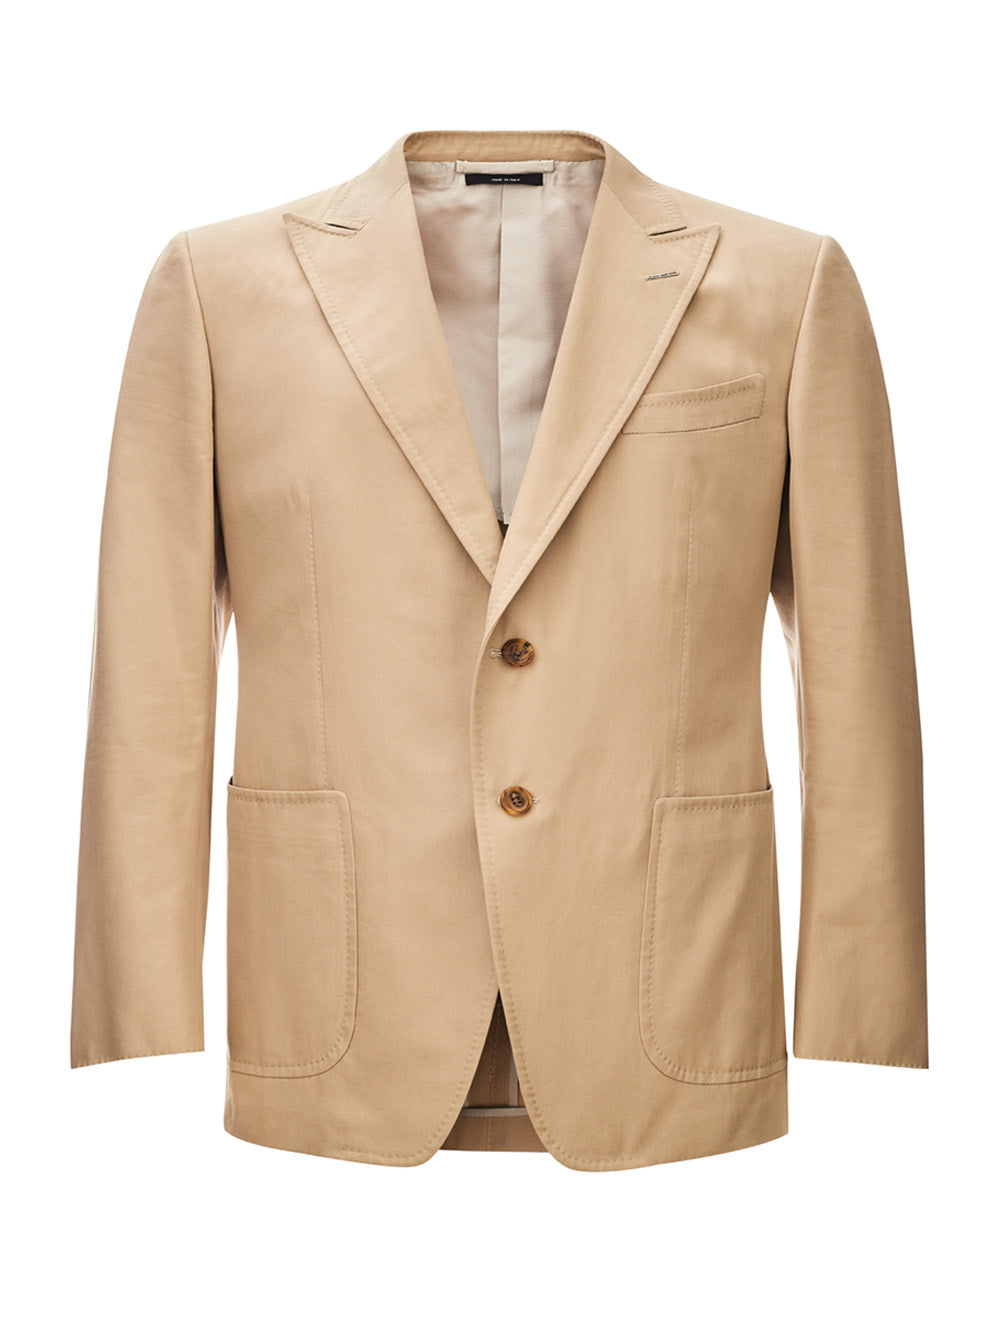 Tom Ford Single-Breasted Cotton Jacket